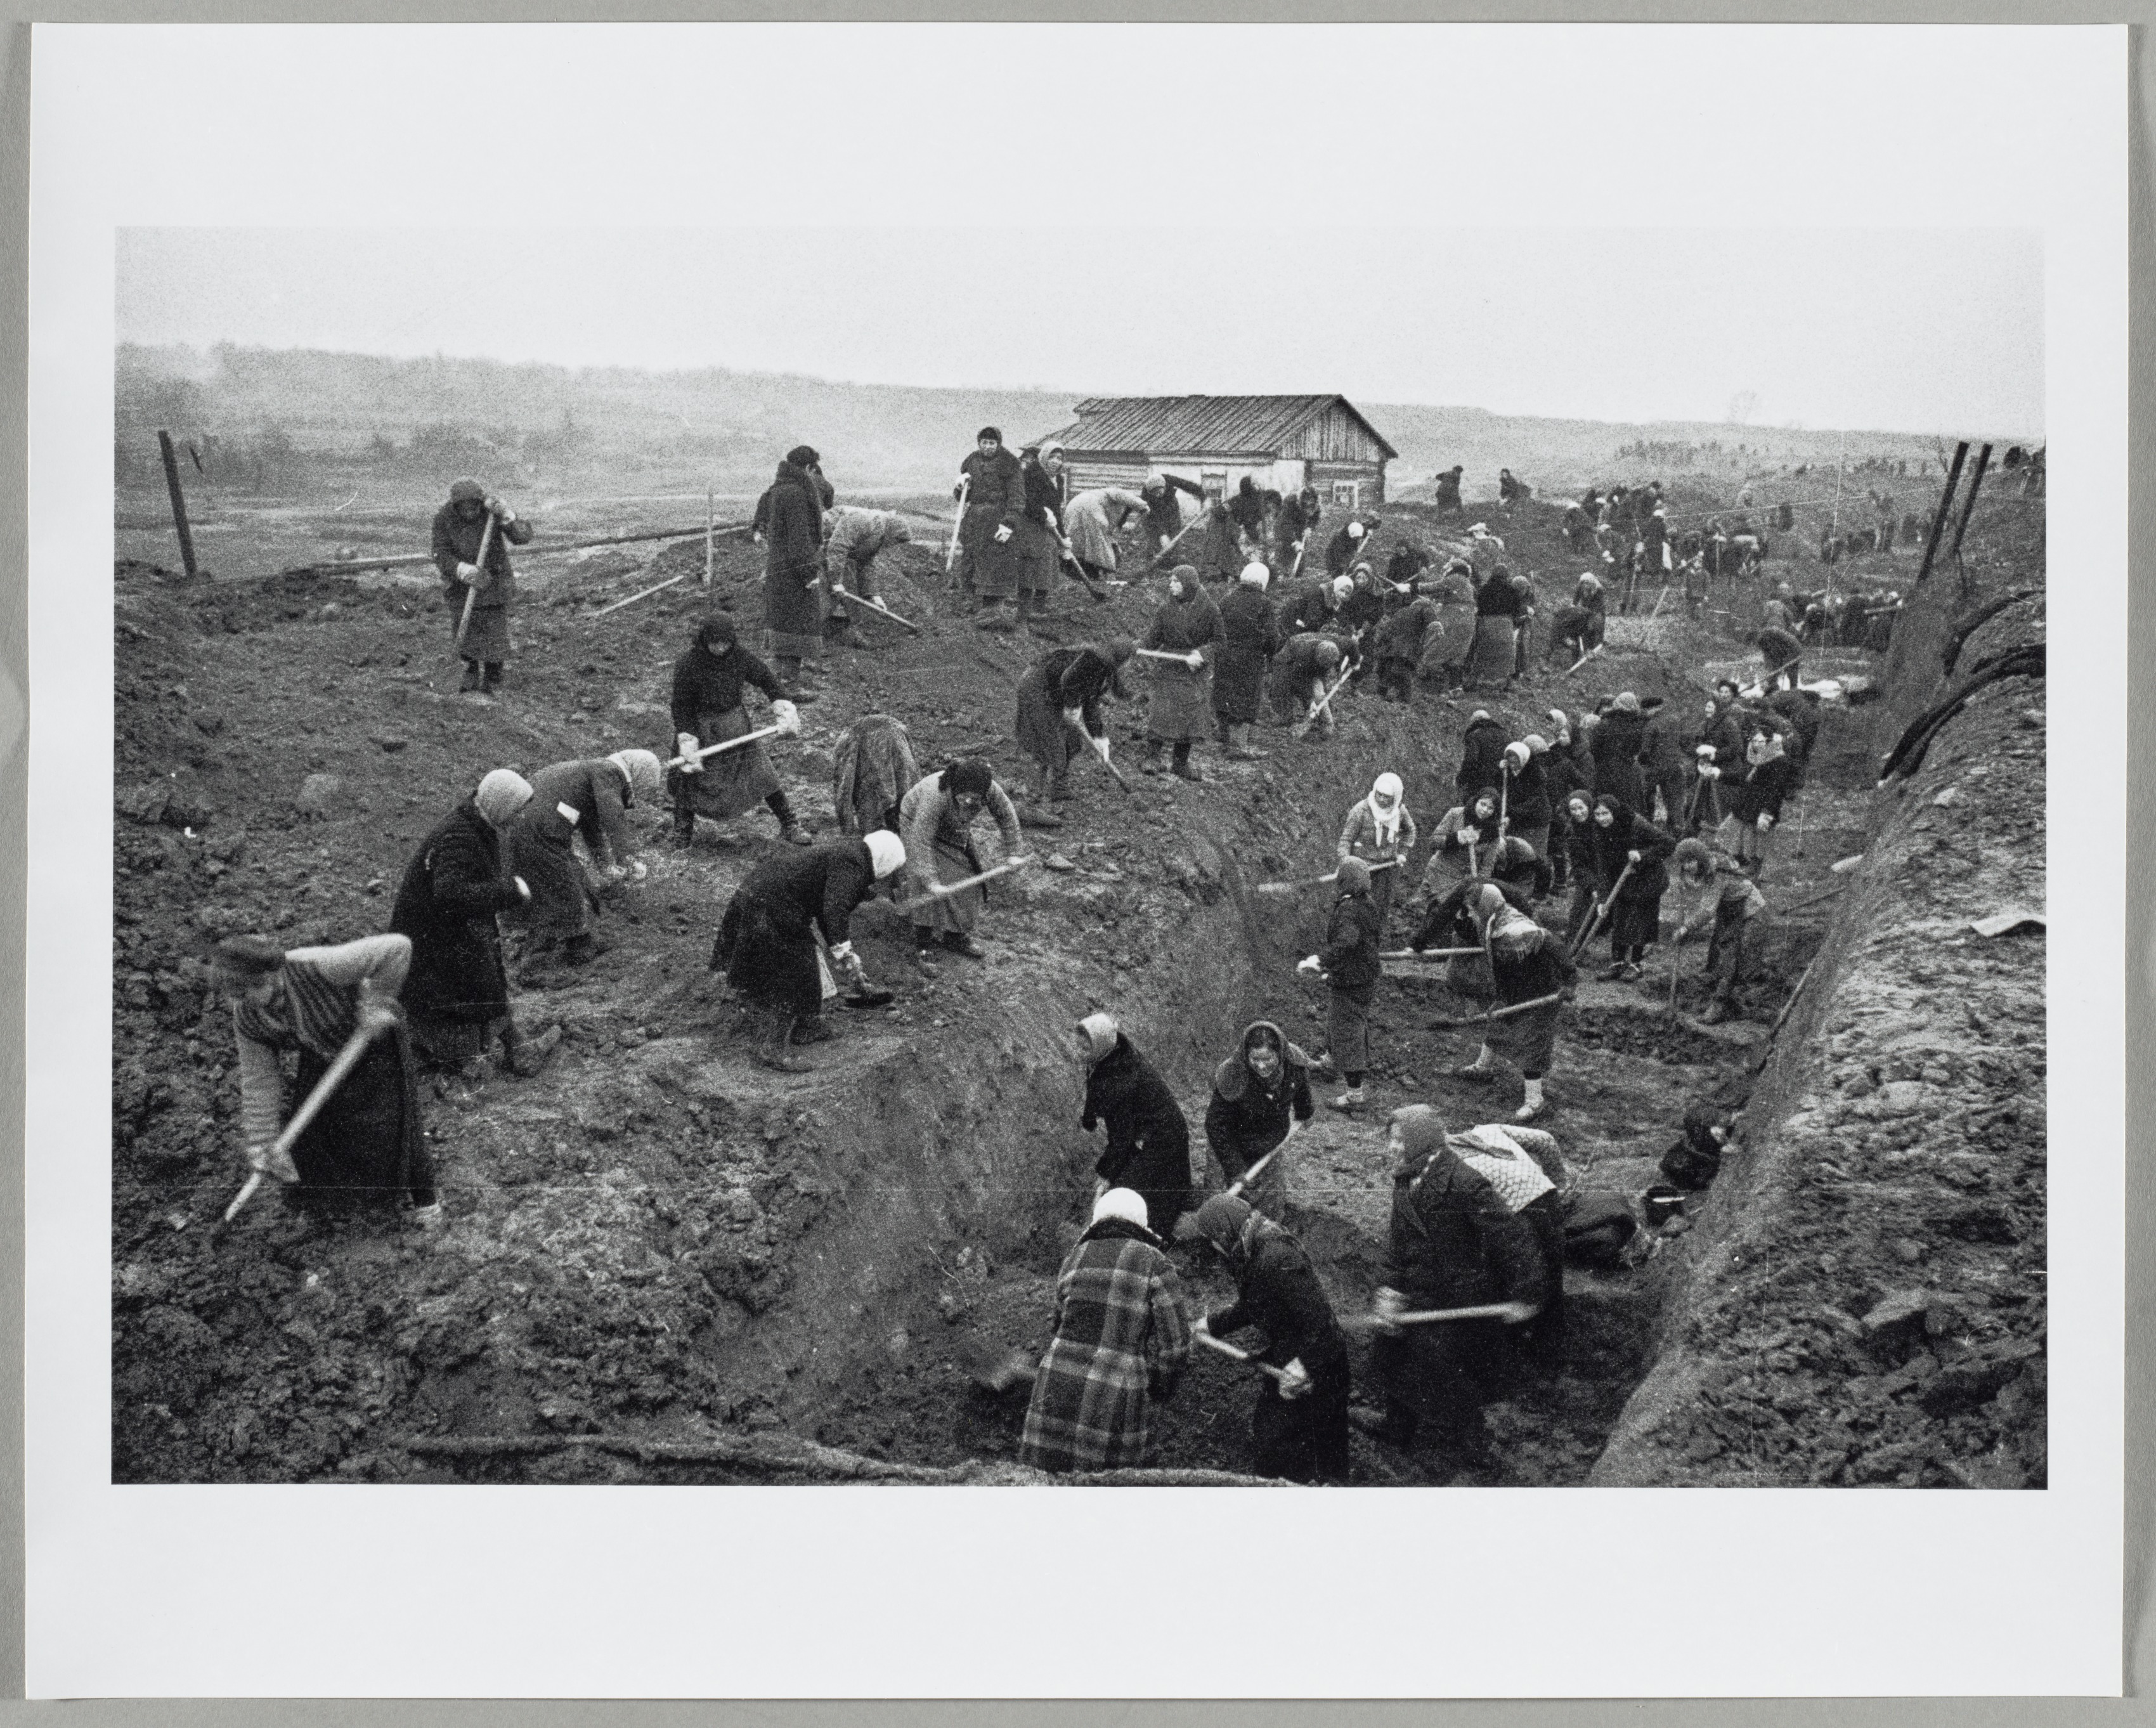 Digging Anti-Tank Trenches near Moscow, October 1941